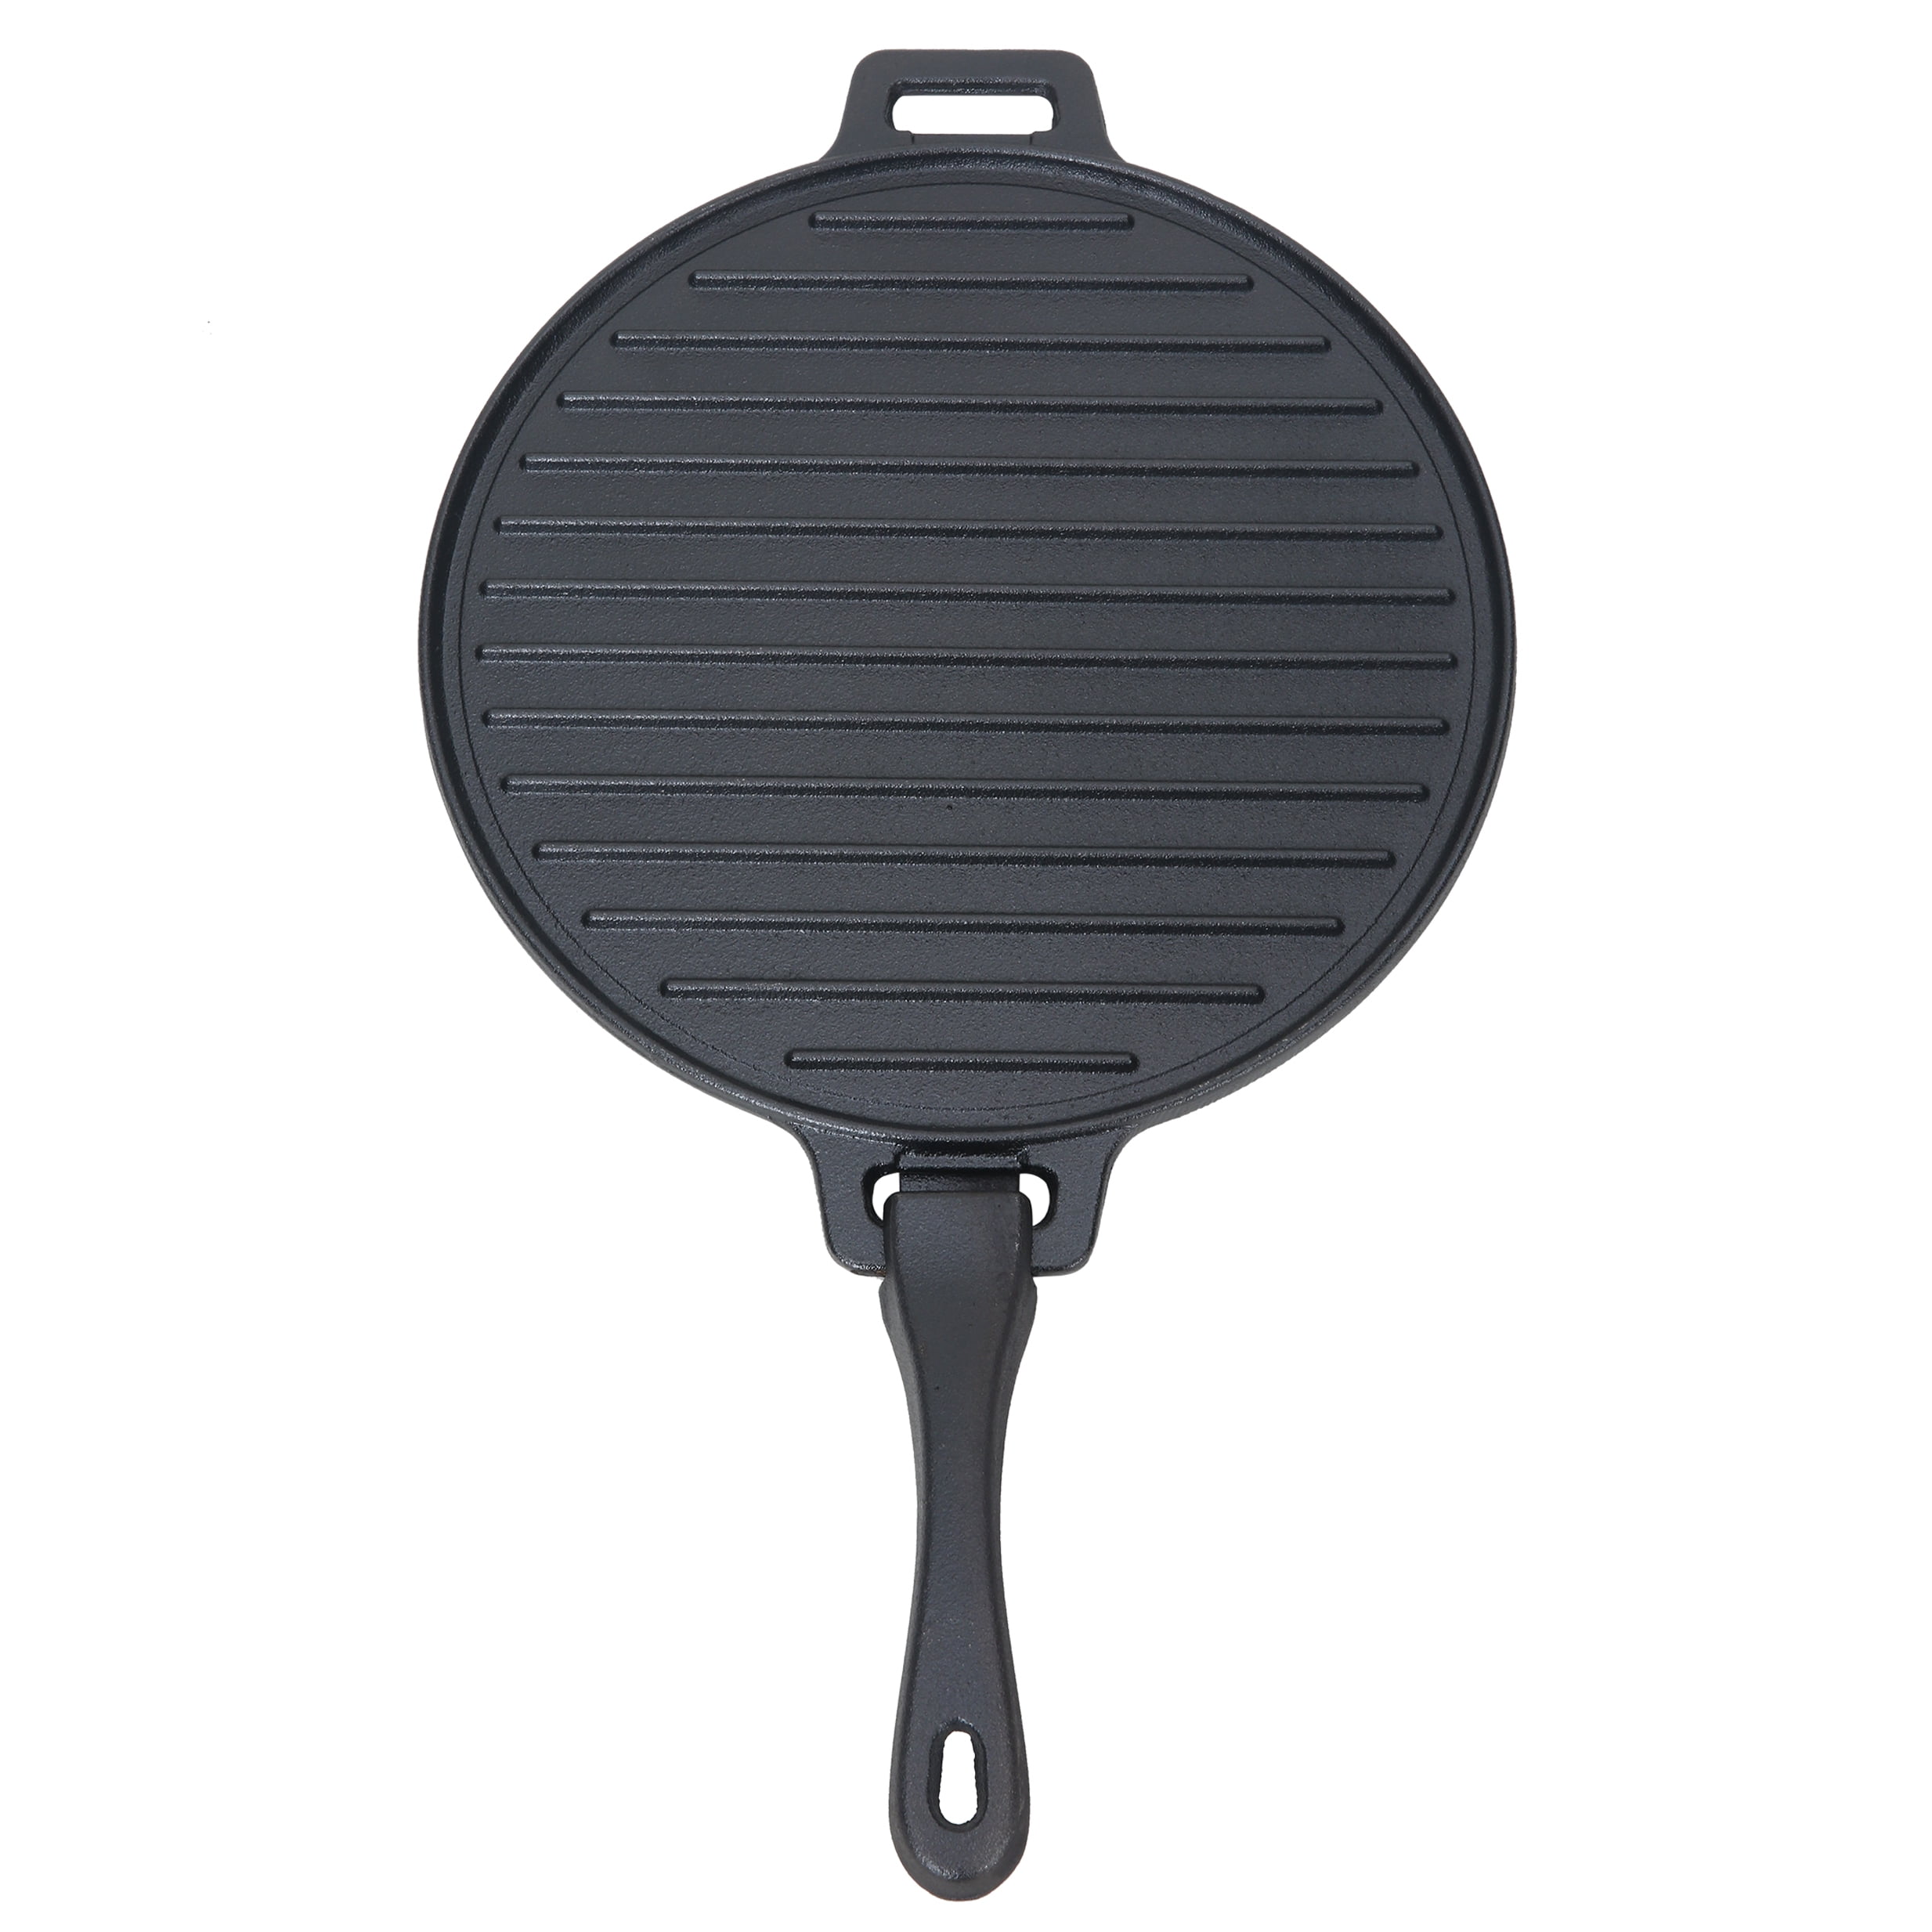 MegaChef Pre-Seasoned 4 Piece Cast Iron Set with Silicone Handles - On Sale  - Bed Bath & Beyond - 32020773